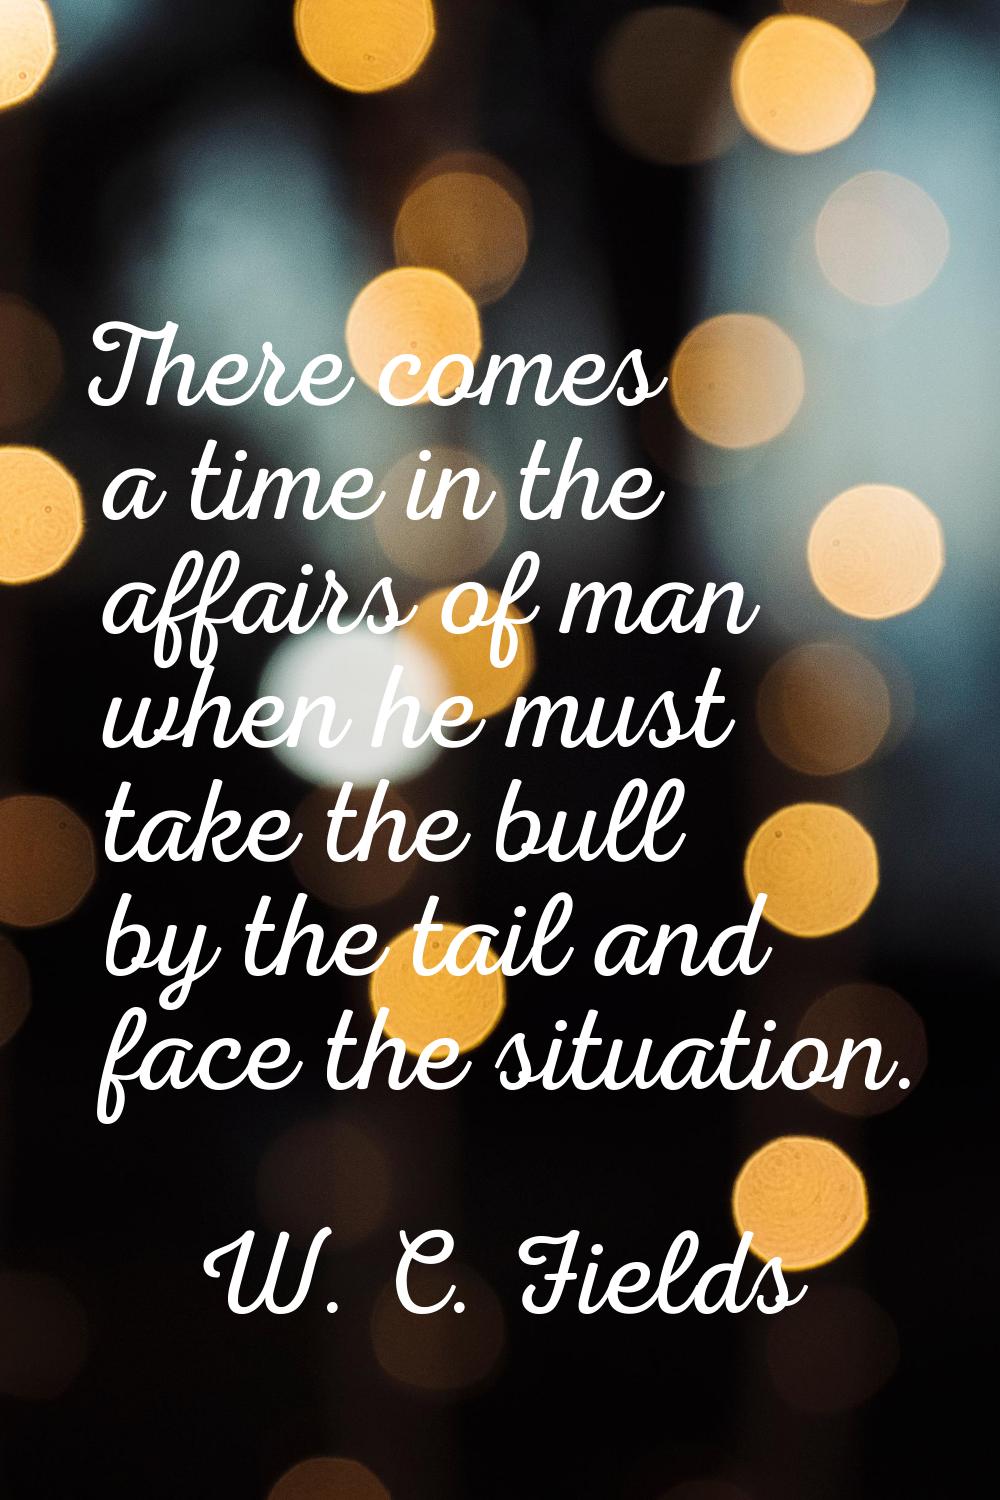 There comes a time in the affairs of man when he must take the bull by the tail and face the situat